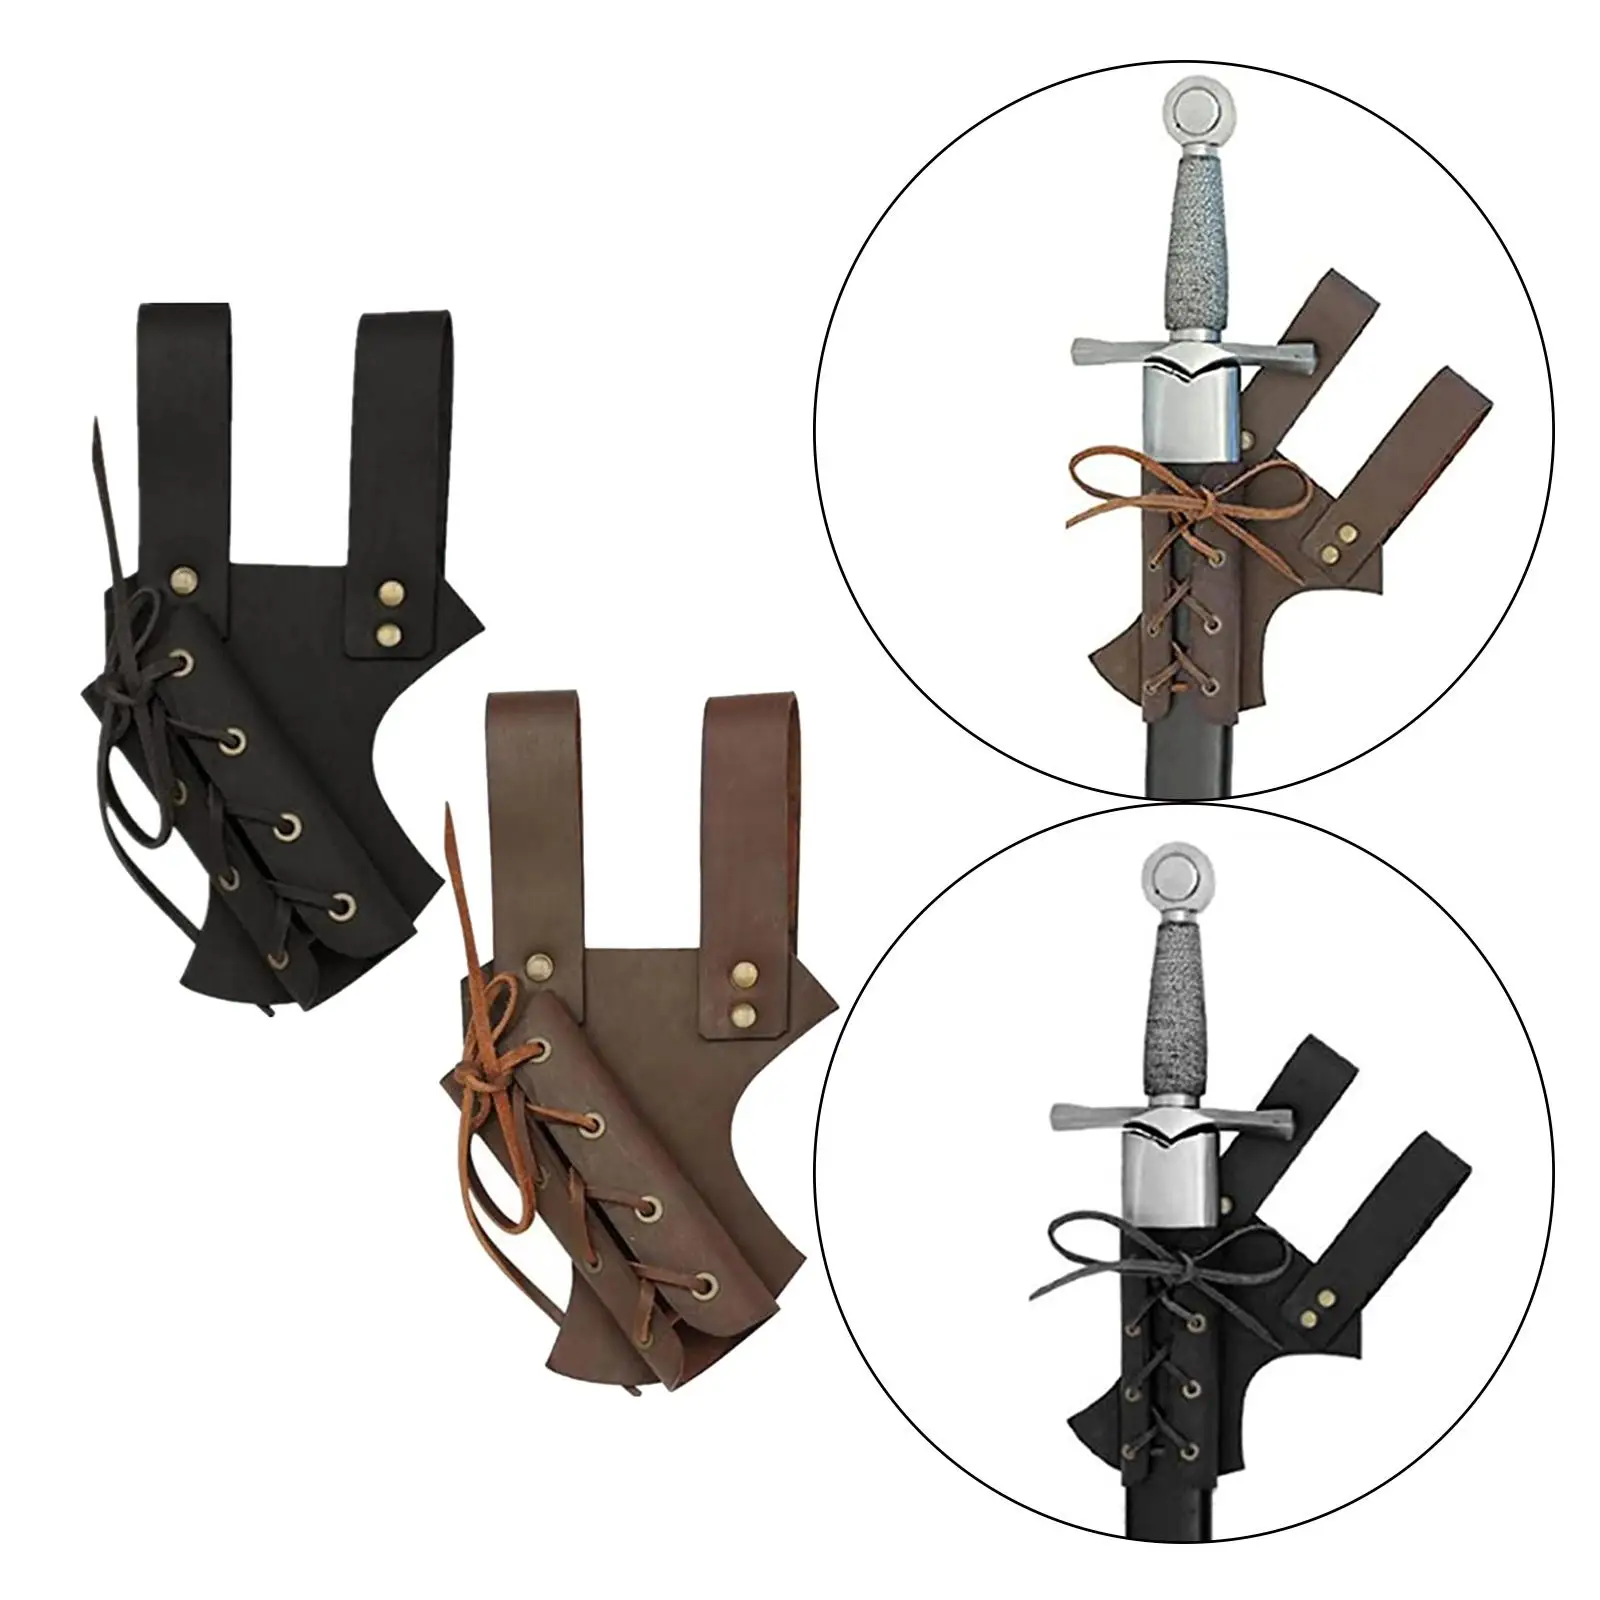 plus size cosplay Medieval Renaissance PU Leather Belt Sword Sheath Knight Rapier Weapon Scabbard for Men Pirate Cosplay Party Performance Stage wonder woman costume